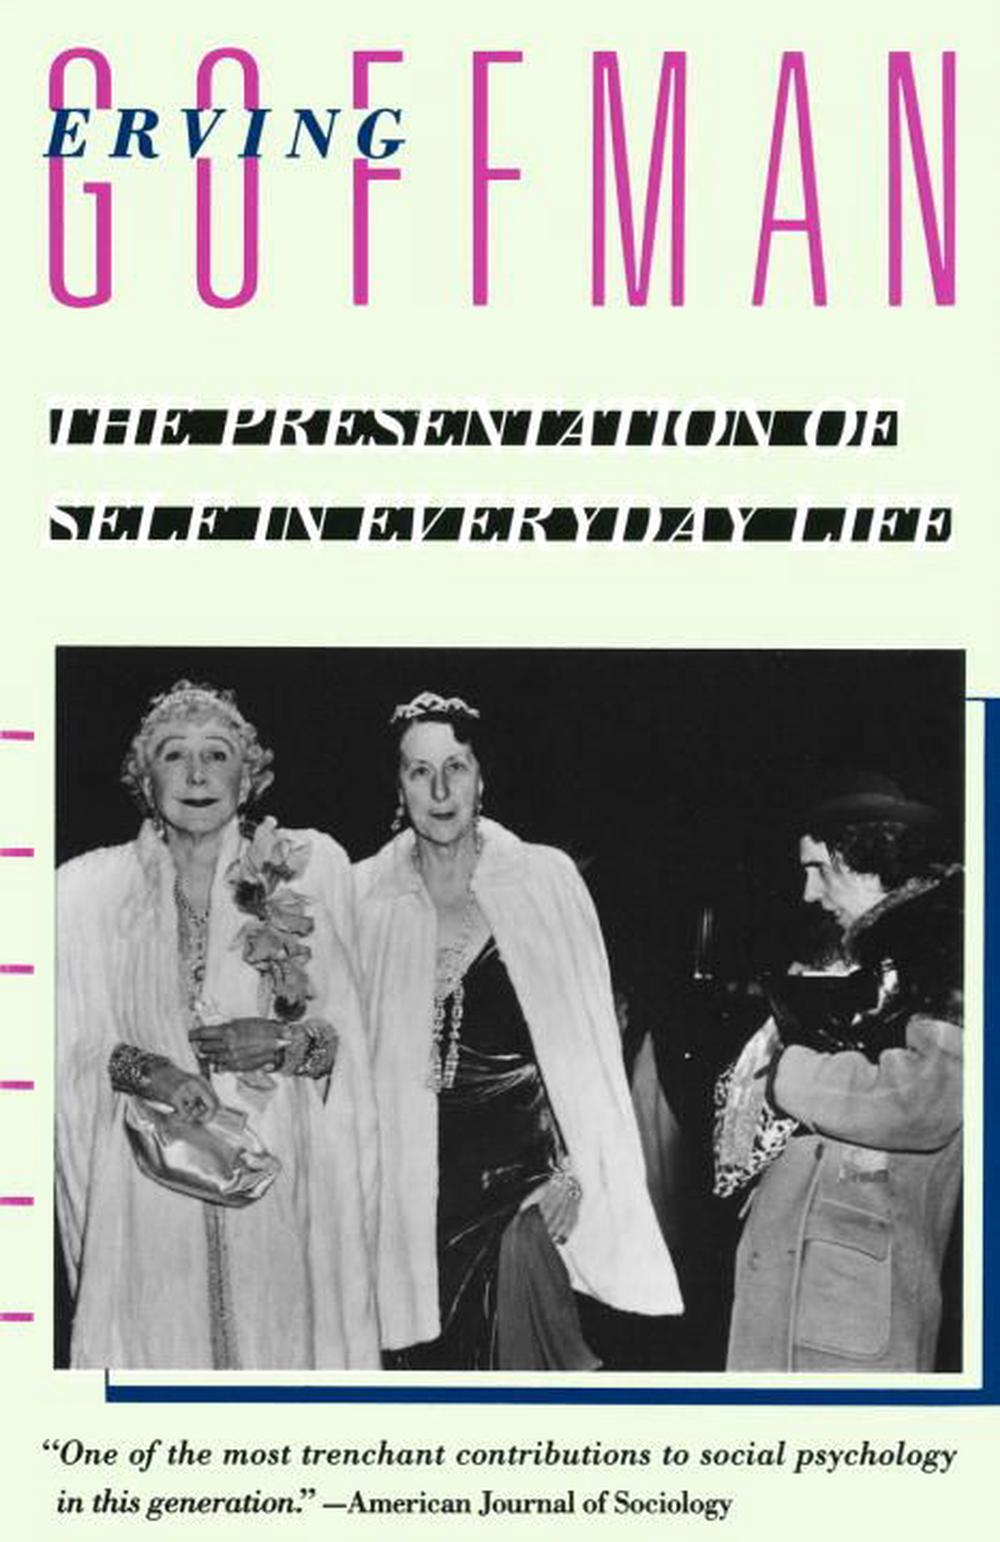 the presentation of self erving goffman summary